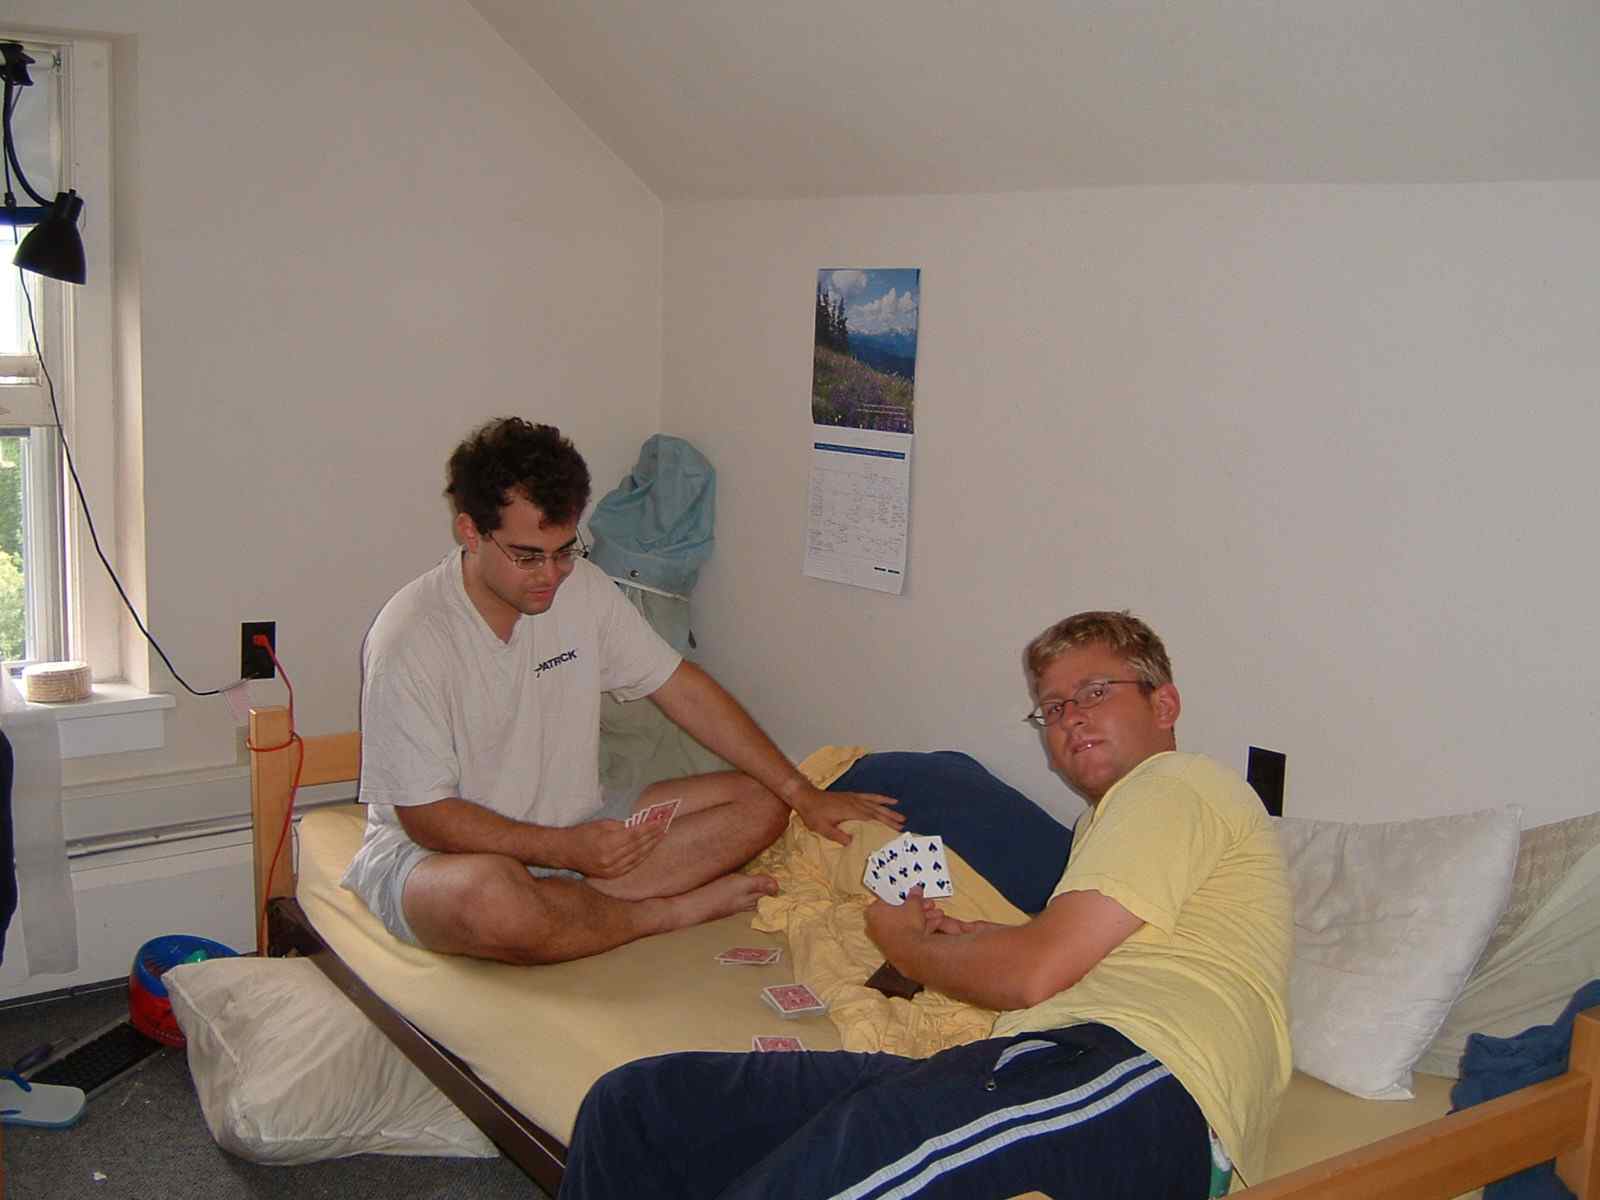 Jonathan (left) and Zach (right) face off in Morgan E, Summer 2004.